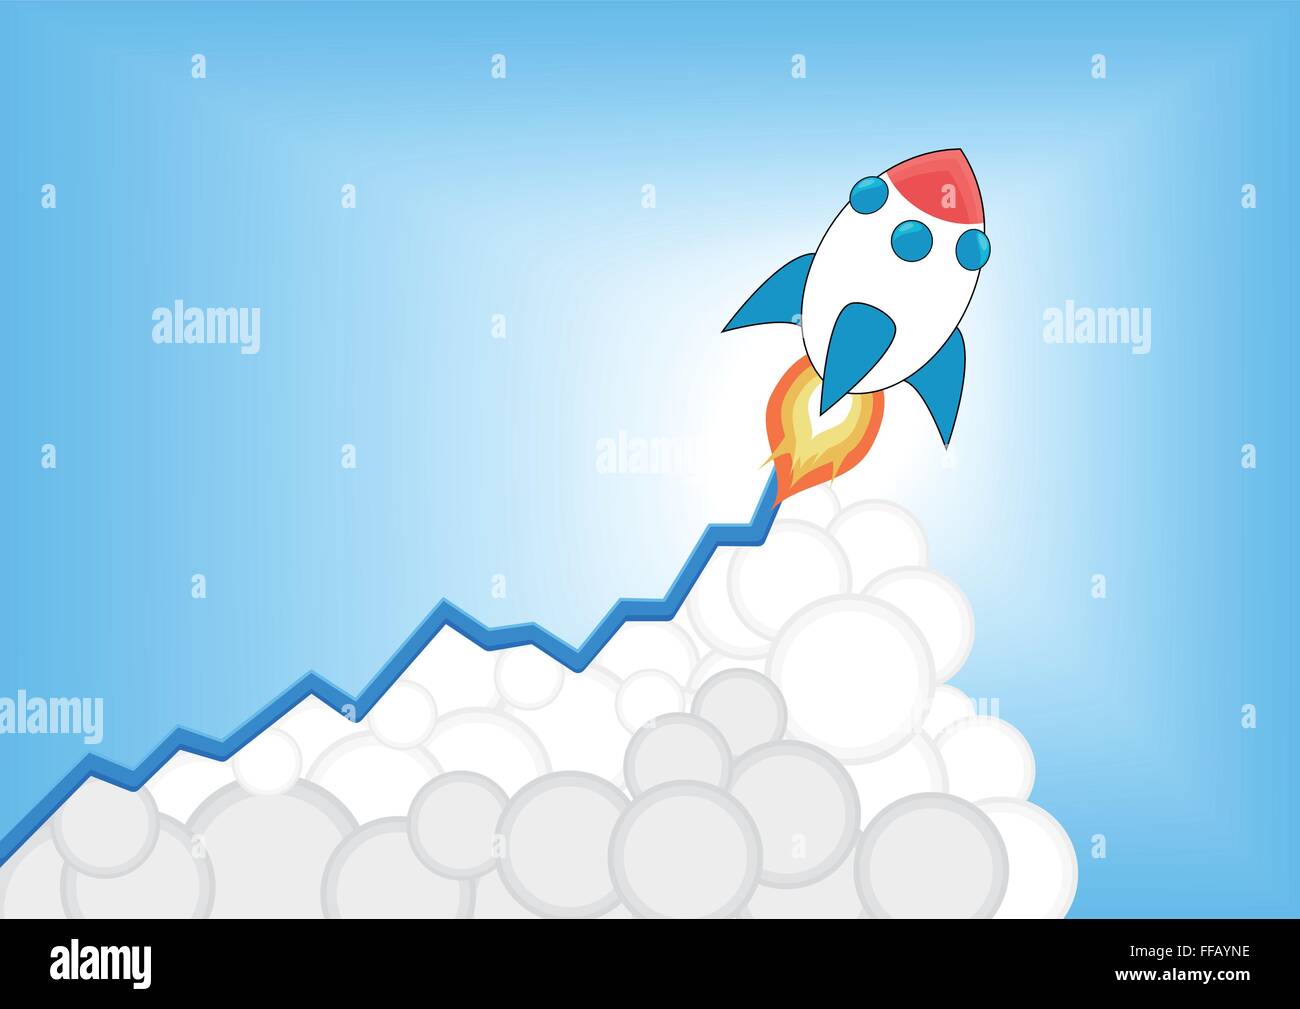 Positive increasing growth chart with rocket infographic Stock Vector